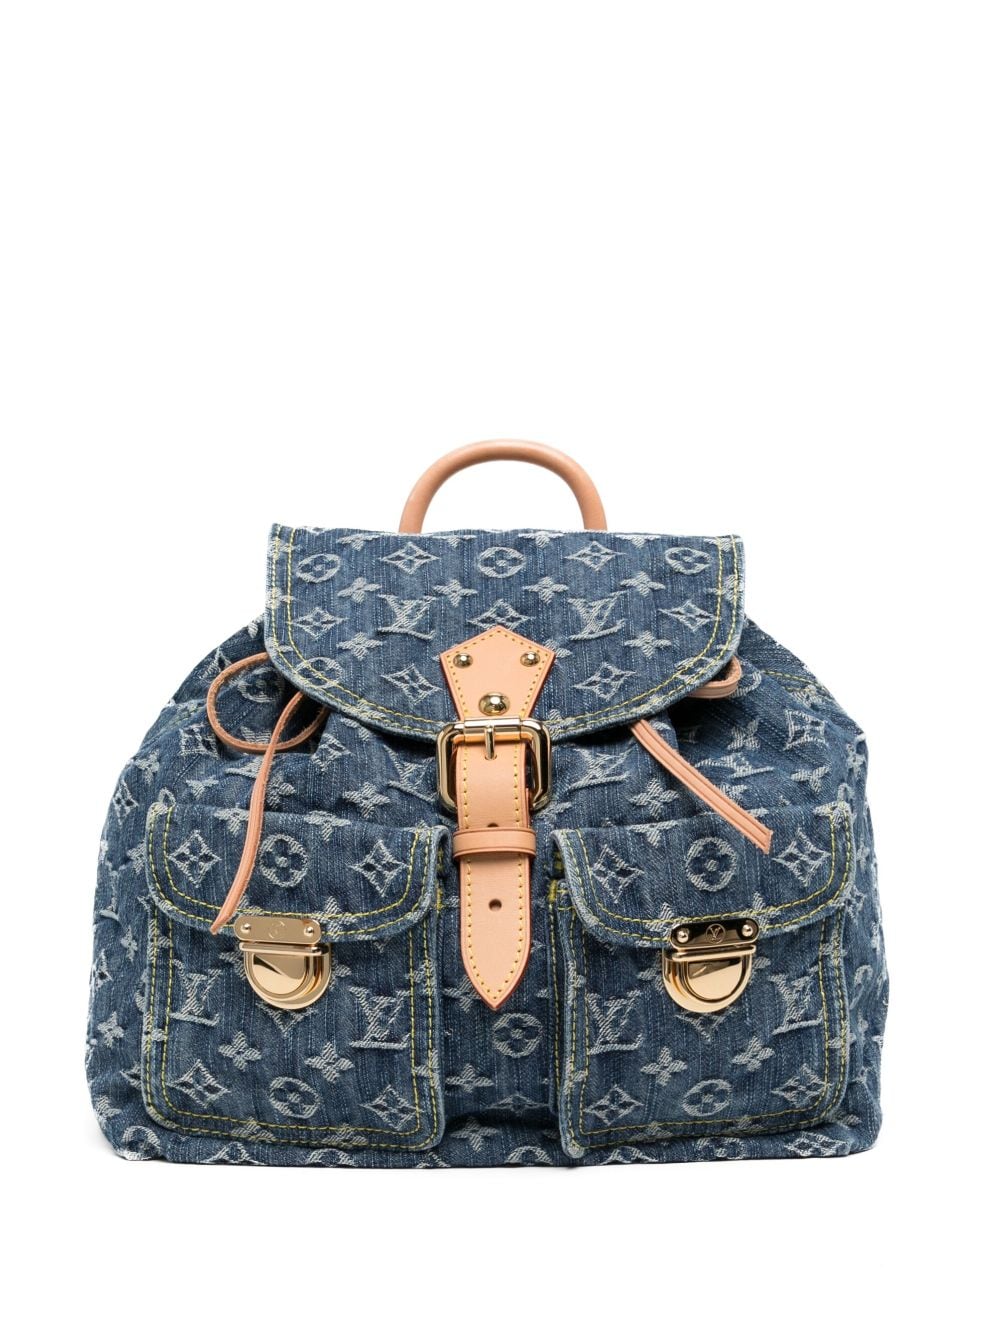 Louis Vuitton Pre-Owned 2006 Sac a Dos backpack - Blue von Louis Vuitton Pre-Owned